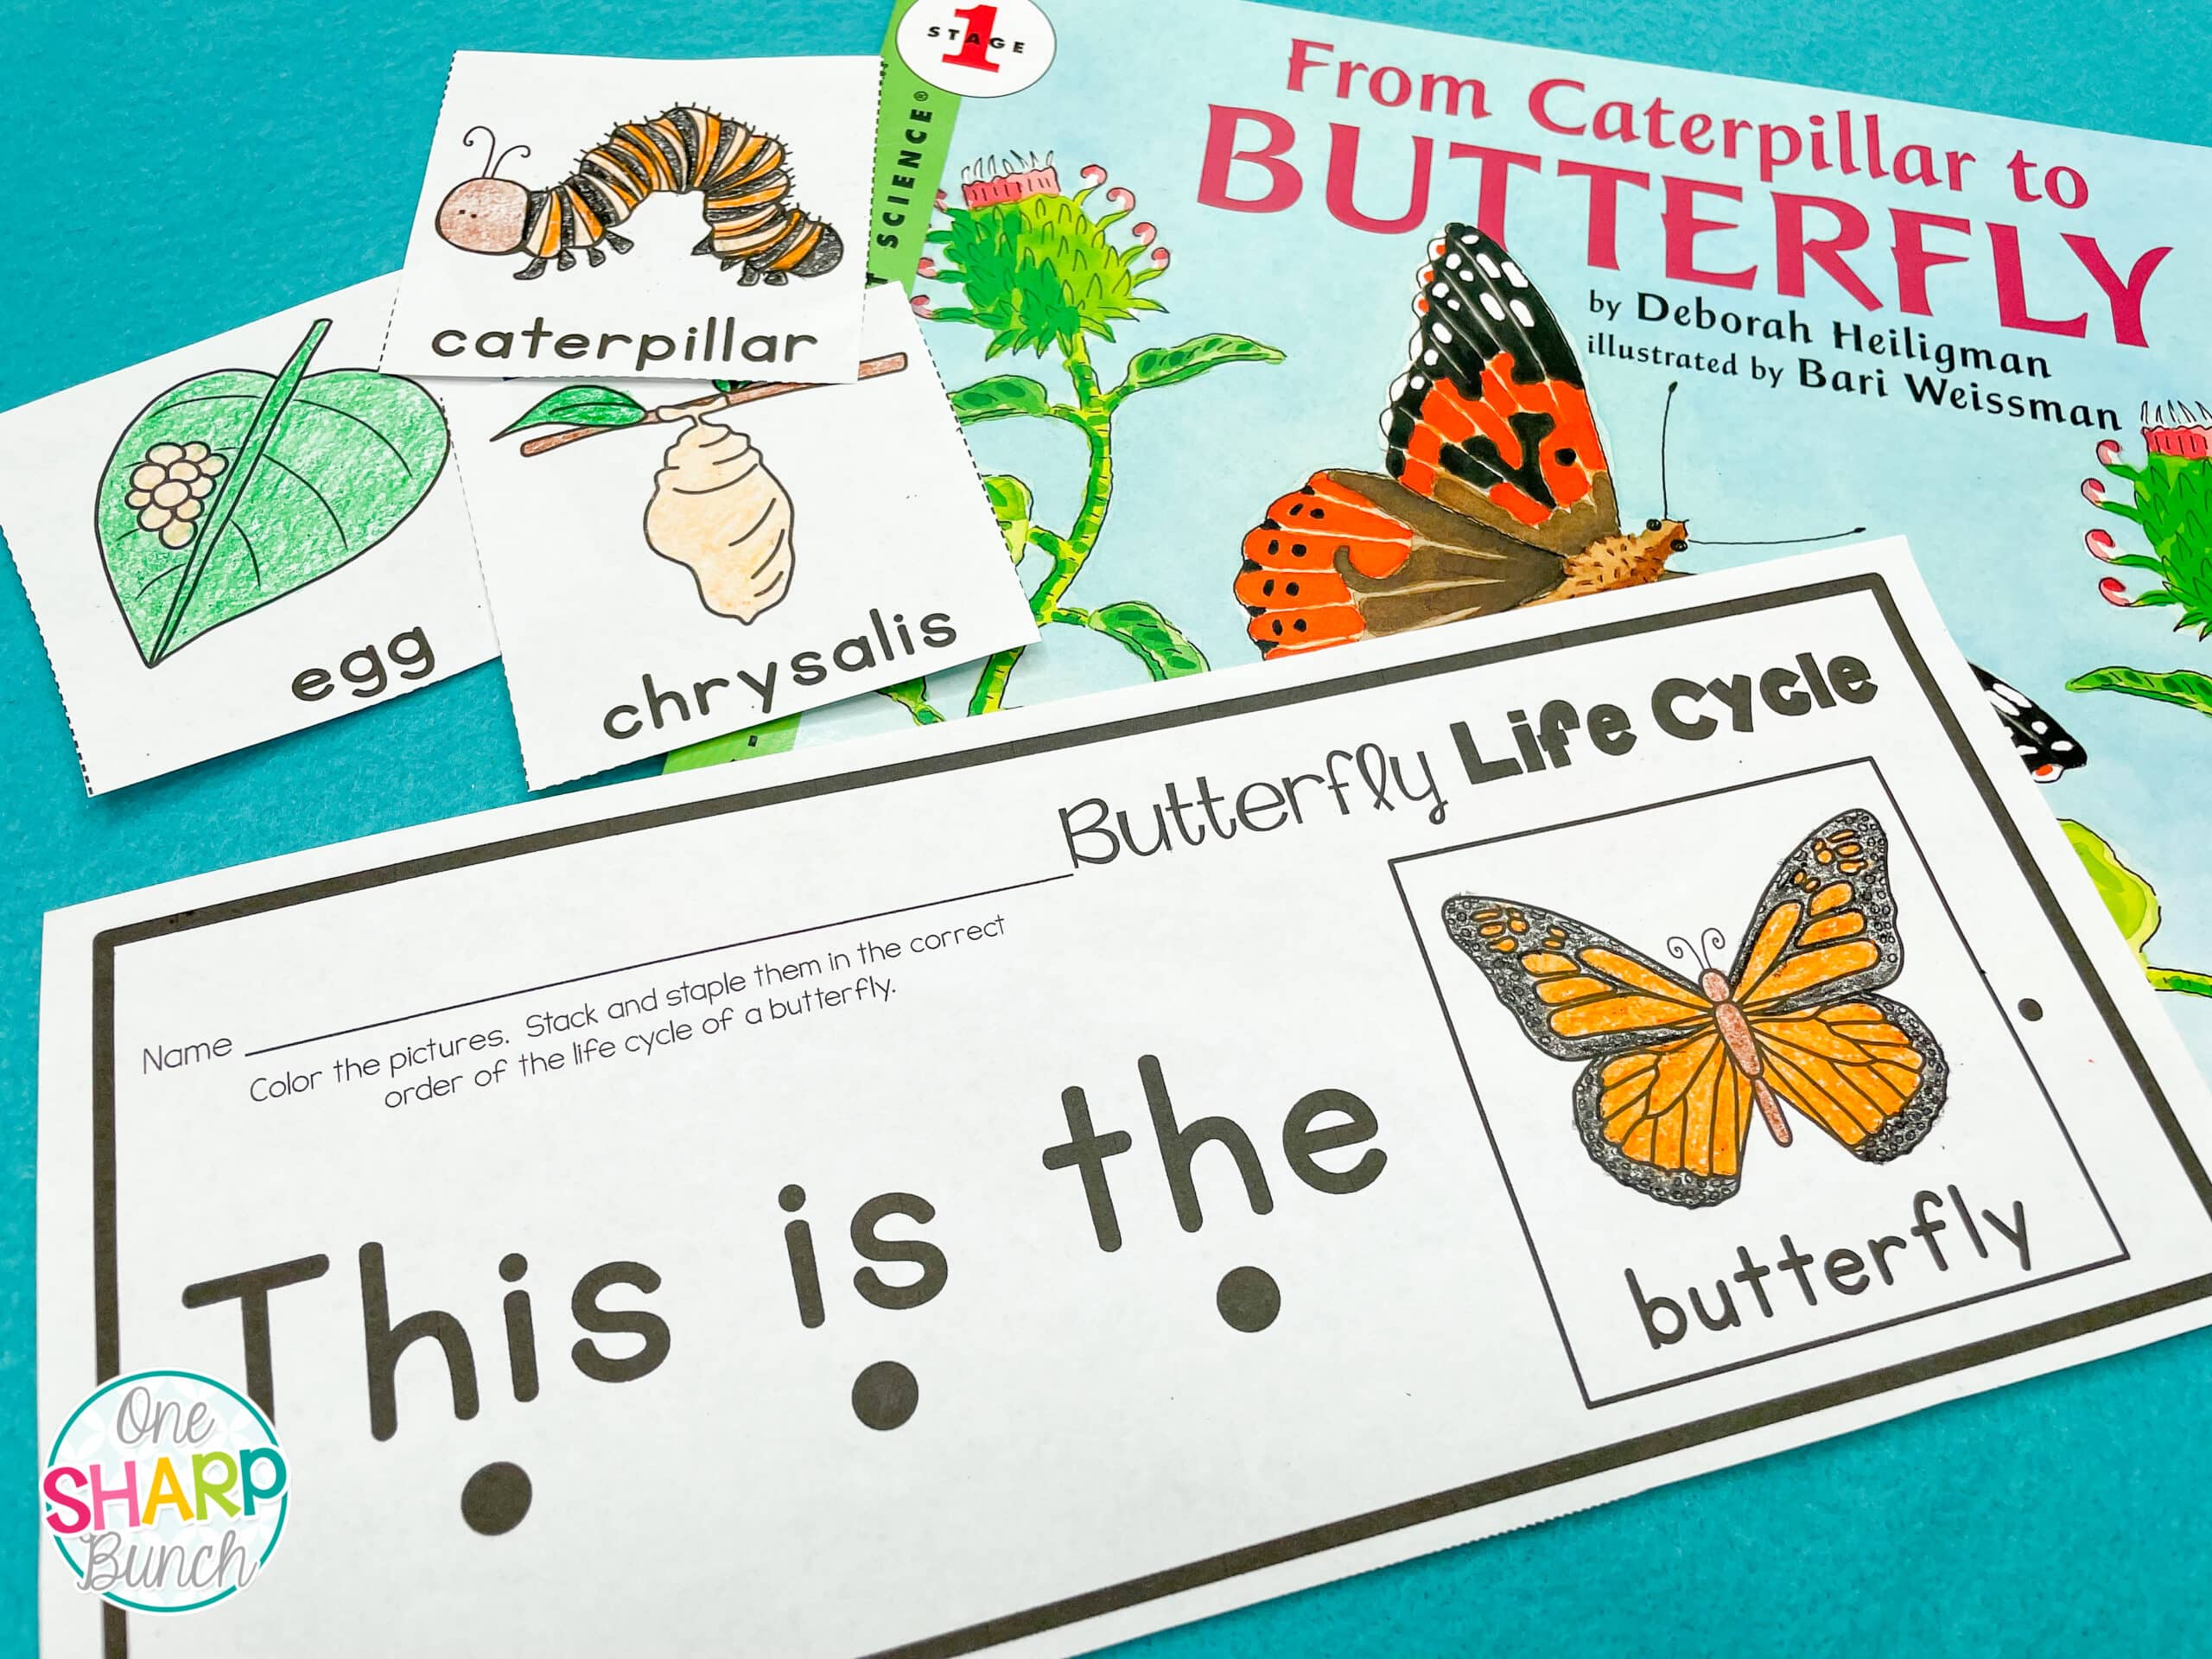 Teach your Preschool and Kindergarten students all about the life cycle of a butterfly with this butterfly life cycle poem, butterfly craft and FREE butterfly life cycle sequence strips! These interactive spring activities are the perfect way to explore how butterflies change and grow!